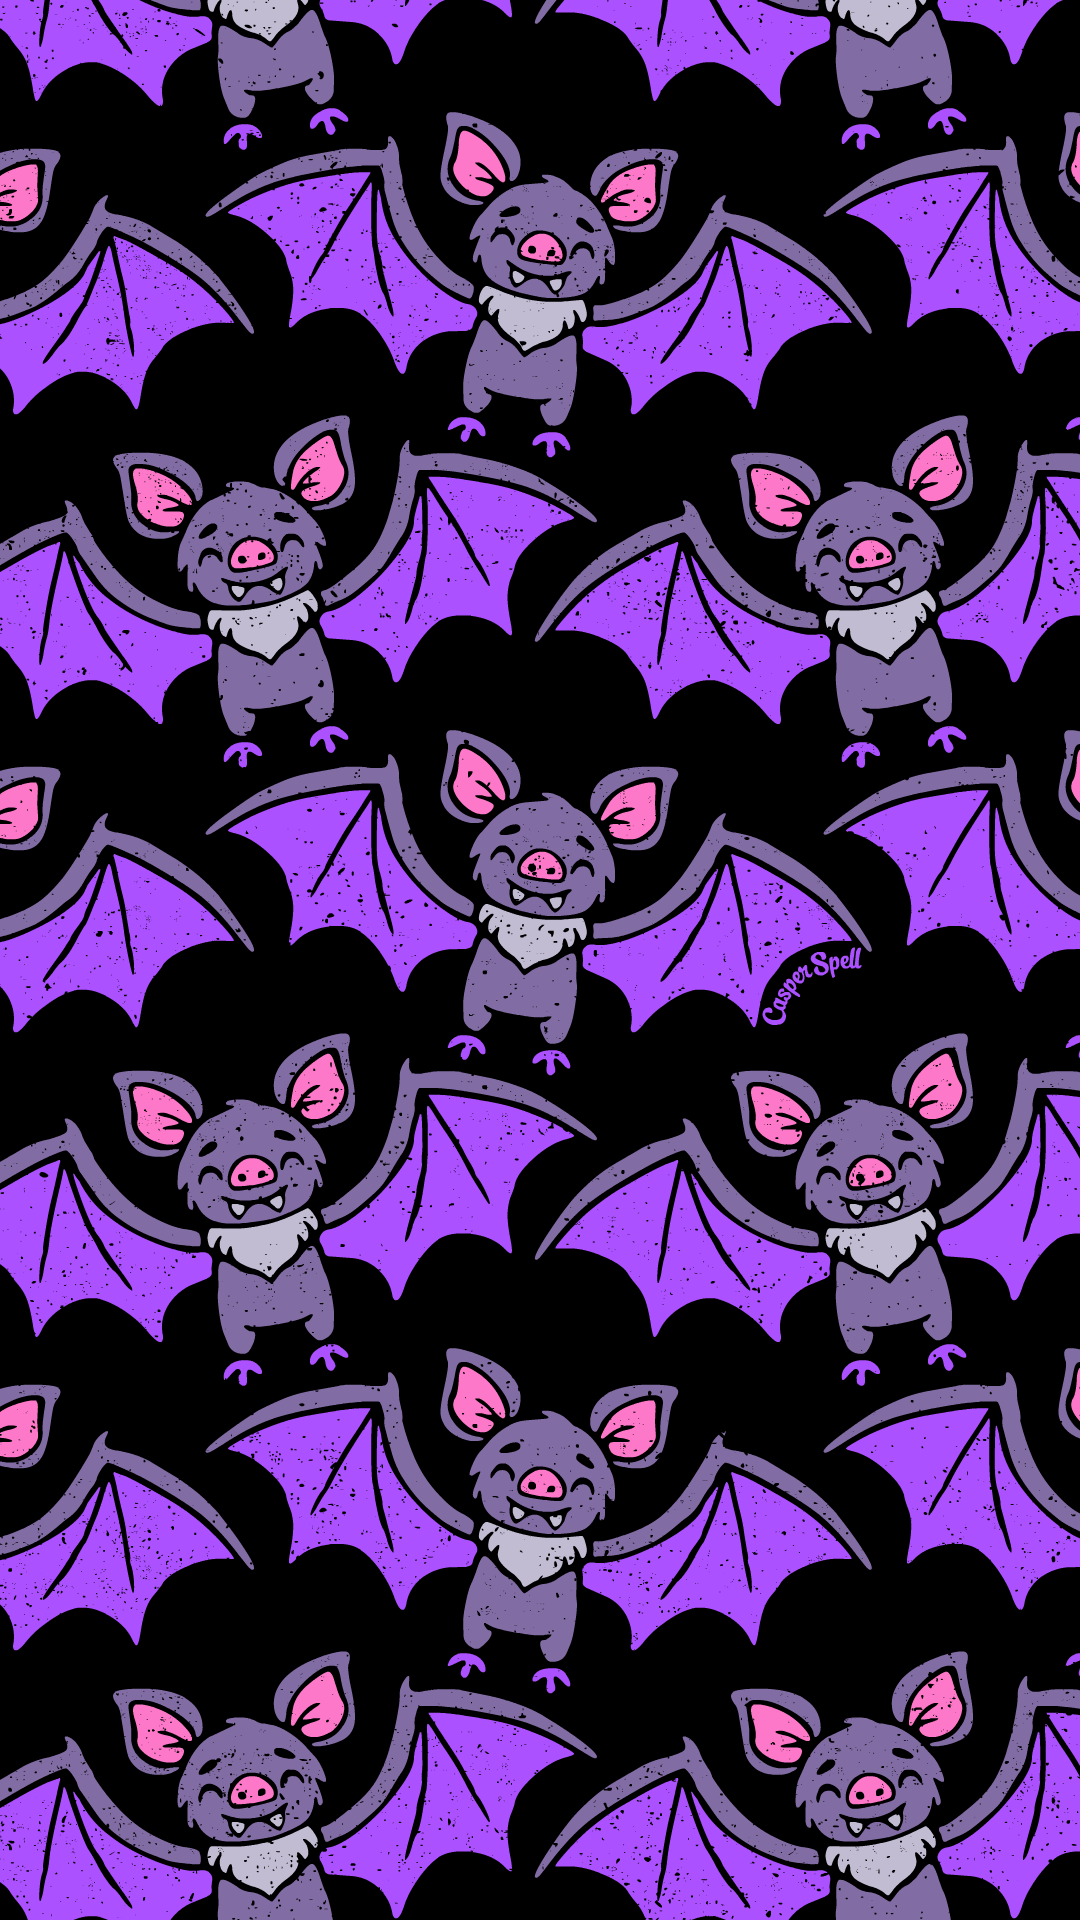 casperspell: ““Batty Bats” pattern for you! Feel free to save as your phone lock scre. Halloween wallpaper background, Halloween background, Halloween wallpaper